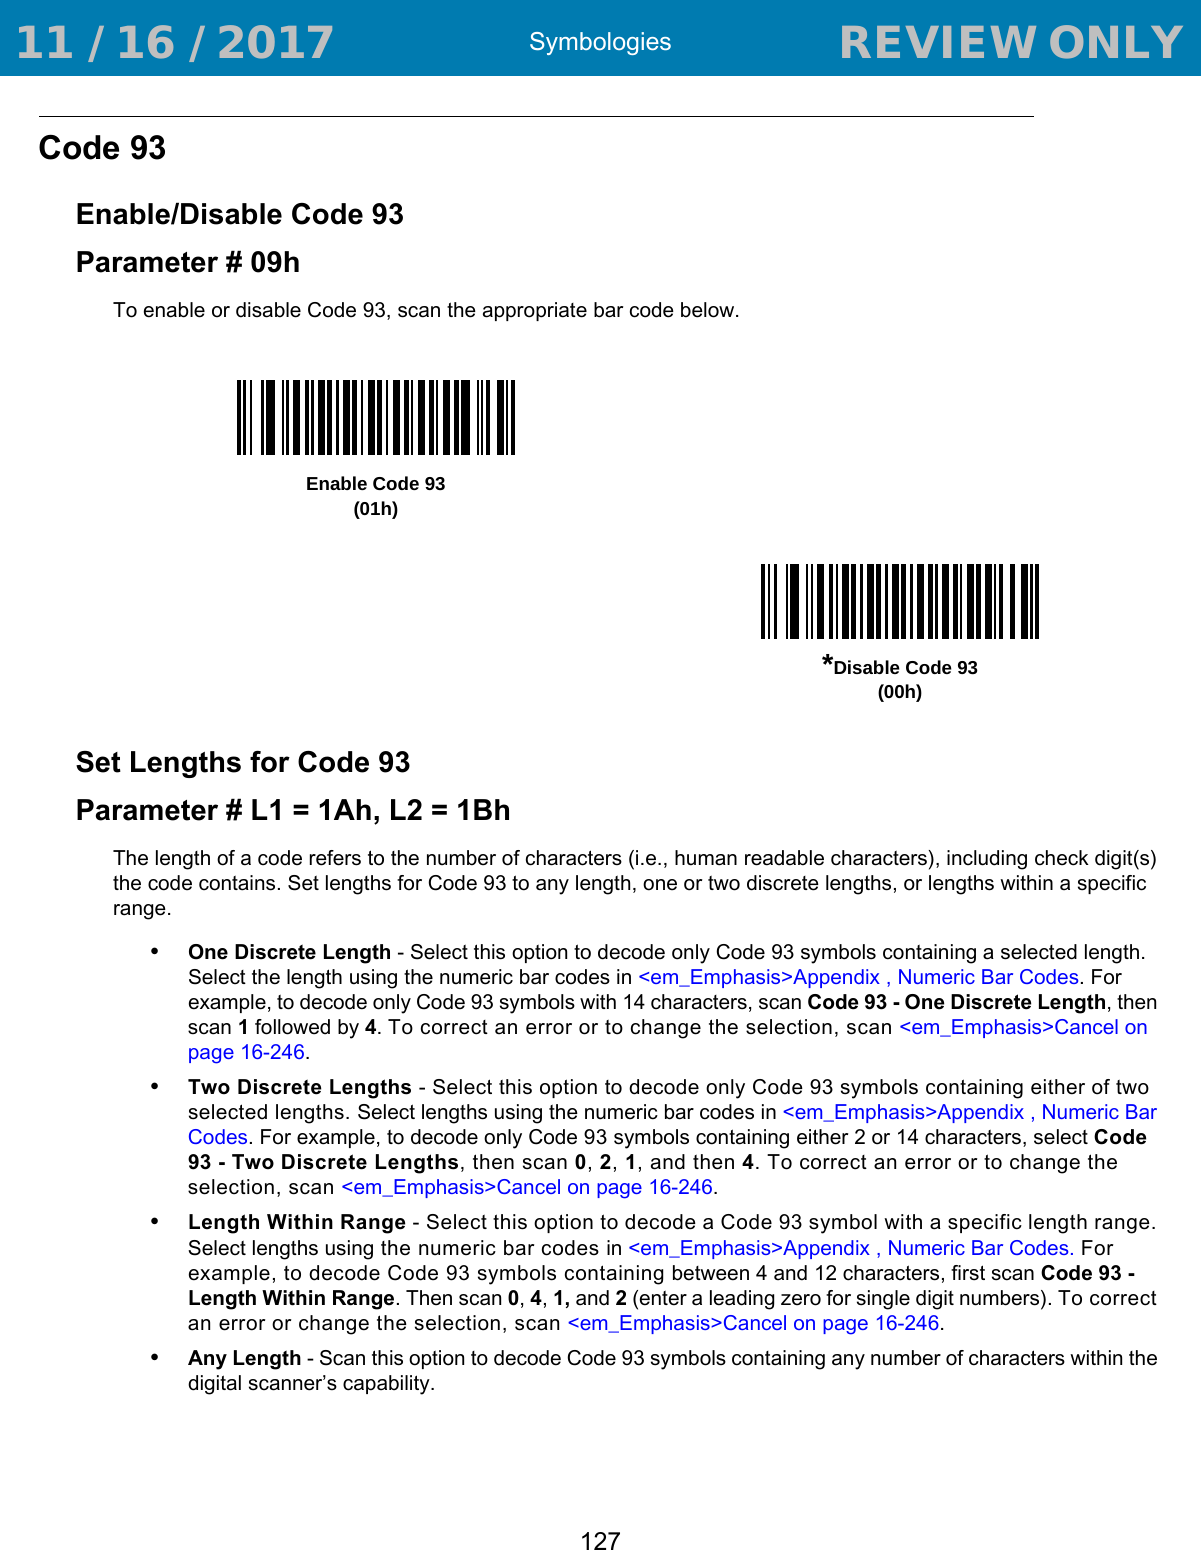 Symbologies127Code 93Enable/Disable Code 93Parameter # 09hTo enable or disable Code 93, scan the appropriate bar code below. Set Lengths for Code 93Parameter # L1 = 1Ah, L2 = 1BhThe length of a code refers to the number of characters (i.e., human readable characters), including check digit(s) the code contains. Set lengths for Code 93 to any length, one or two discrete lengths, or lengths within a specific range.•One Discrete Length - Select this option to decode only Code 93 symbols containing a selected length. Select the length using the numeric bar codes in &lt;em_Emphasis&gt;Appendix , Numeric Bar Codes. For example, to decode only Code 93 symbols with 14 characters, scan Code 93 - One Discrete Length, then scan 1 followed by 4. To correct an error or to change the selection, scan &lt;em_Emphasis&gt;Cancel on page 16-246.•Two Discrete Lengths - Select this option to decode only Code 93 symbols containing either of two selected lengths. Select lengths using the numeric bar codes in &lt;em_Emphasis&gt;Appendix , Numeric Bar Codes. For example, to decode only Code 93 symbols containing either 2 or 14 characters, select Code 93 - Two Discrete Lengths, then scan 0, 2, 1, and then 4. To correct an error or to change the selection, scan &lt;em_Emphasis&gt;Cancel on page 16-246.•Length Within Range - Select this option to decode a Code 93 symbol with a specific length range. Select lengths using the numeric bar codes in &lt;em_Emphasis&gt;Appendix , Numeric Bar Codes. For example, to decode Code 93 symbols containing between 4 and 12 characters, first scan Code 93 - Length Within Range. Then scan 0, 4, 1, and 2 (enter a leading zero for single digit numbers). To correct an error or change the selection, scan &lt;em_Emphasis&gt;Cancel on page 16-246.•Any Length - Scan this option to decode Code 93 symbols containing any number of characters within the digital scanner’s capability.Enable Code 93(01h)*Disable Code 93(00h) 11 / 16 / 2017                                  REVIEW ONLY                             REVIEW ONLY - REVIEW ONLY - REVIEW ONLY